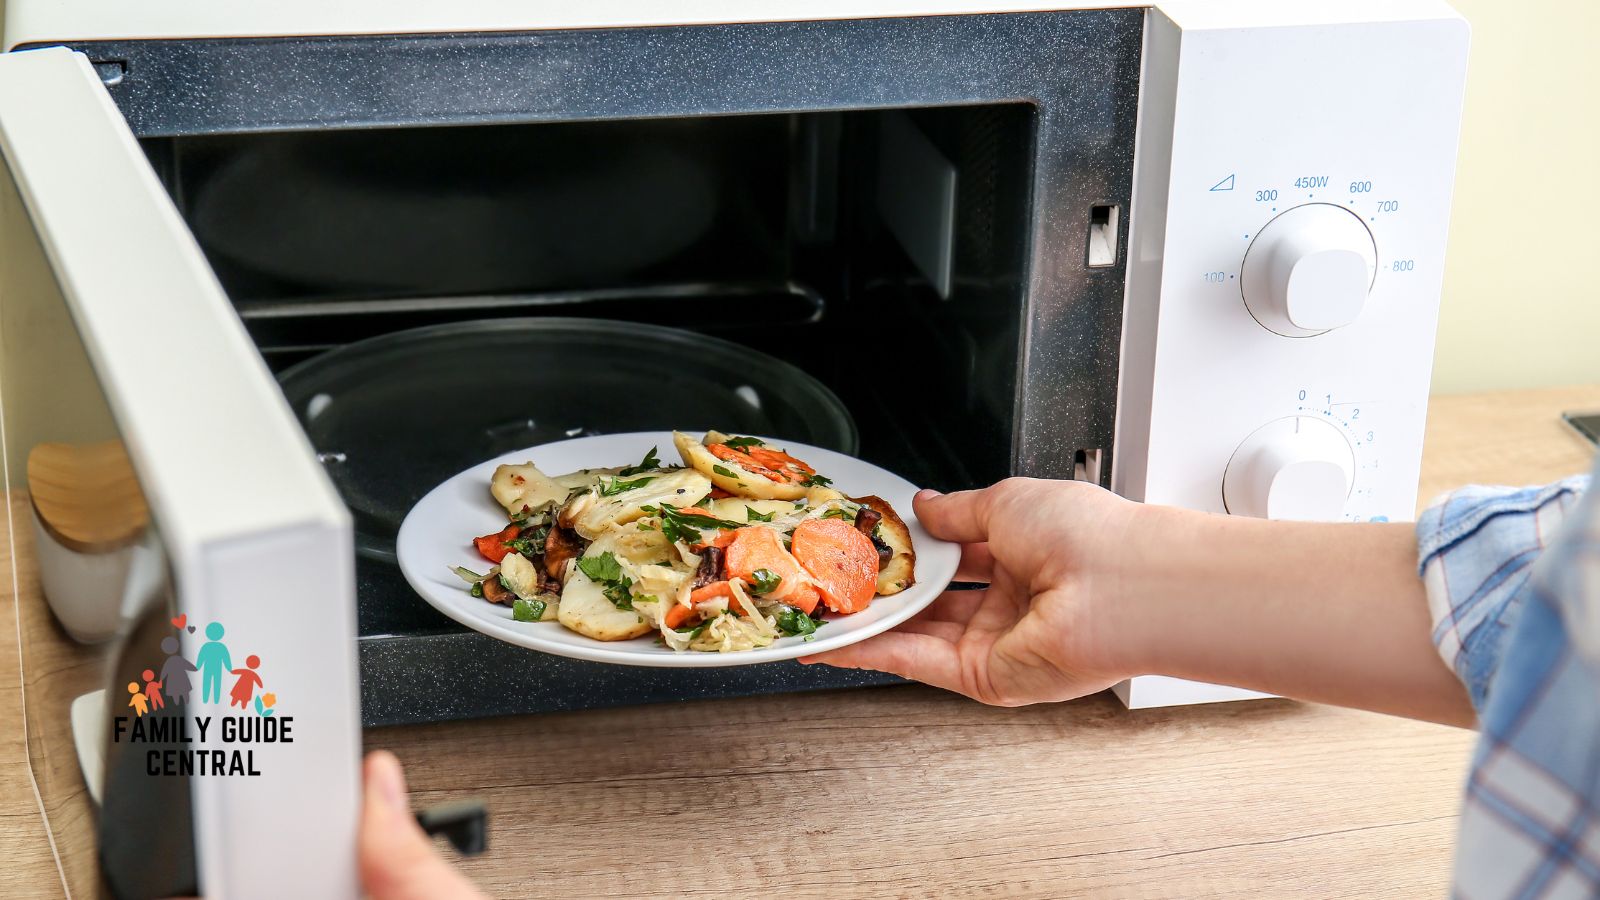 Putting food in the microwave and letting it spin - familyguidecentral.com